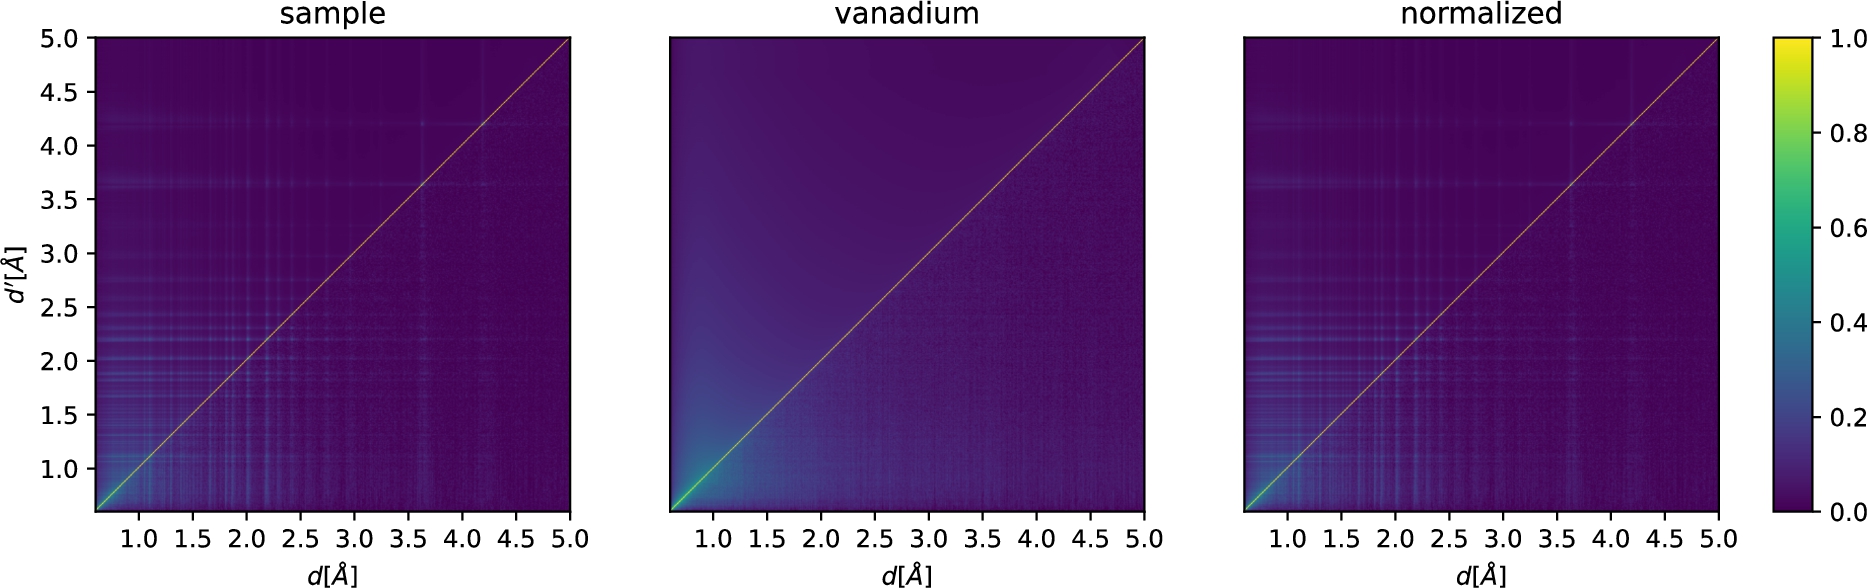 Correlation matrices for a powder-reduction workflow. We show the result for the sample S (left, α=10·αactualsample=22.3), vanadium V (center, α=10·αactualvanadium=47.0), and the normalized P=S/V (right). As the correlation matrices ΣS, ΣV, and ΣP are symmetric under d↔d′, we can show in the same figure the analytical result (above the diagonal) and the bootstrap result (below the diagonal). For improved readability, the plots have a limited d-spacing range as there are few further features for higher d. See Appendix B for a version of the figure with a logarithmic color scale.